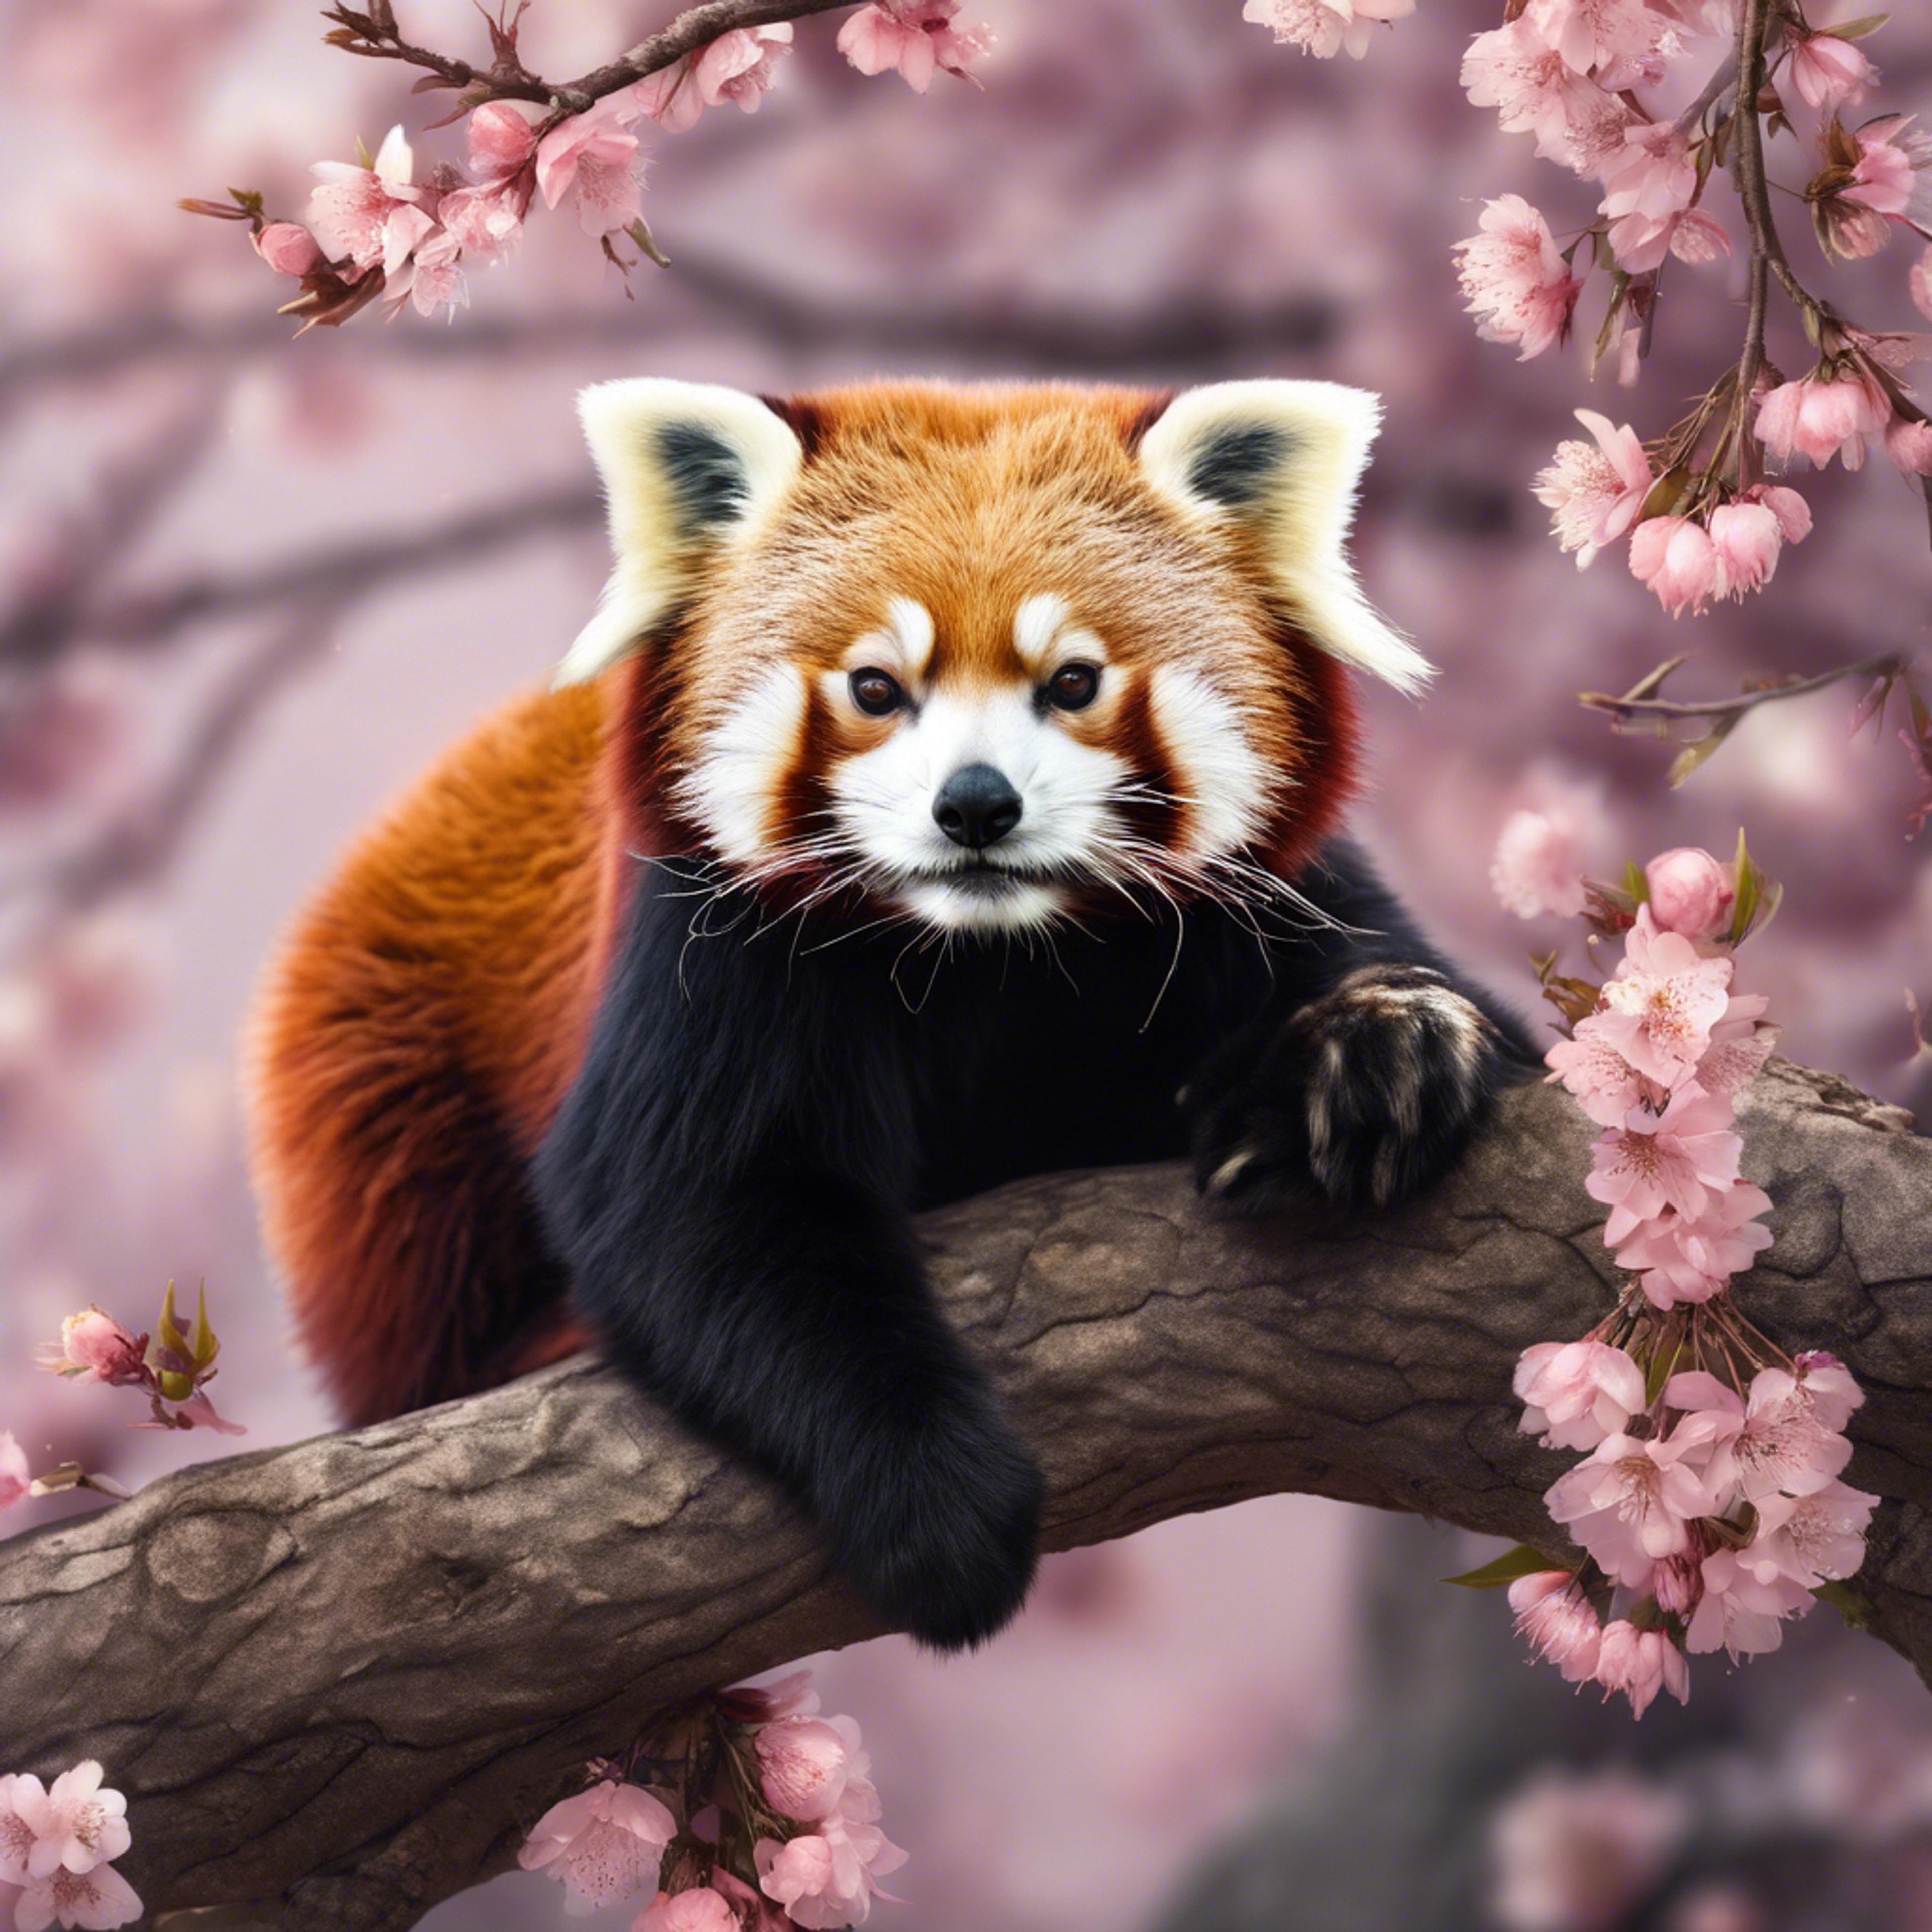 A red panda lounging lazily on a tree branch with a backdrop of blooming cherry blossoms. Fond d'écran[422b6dc9464b43ba80b6]